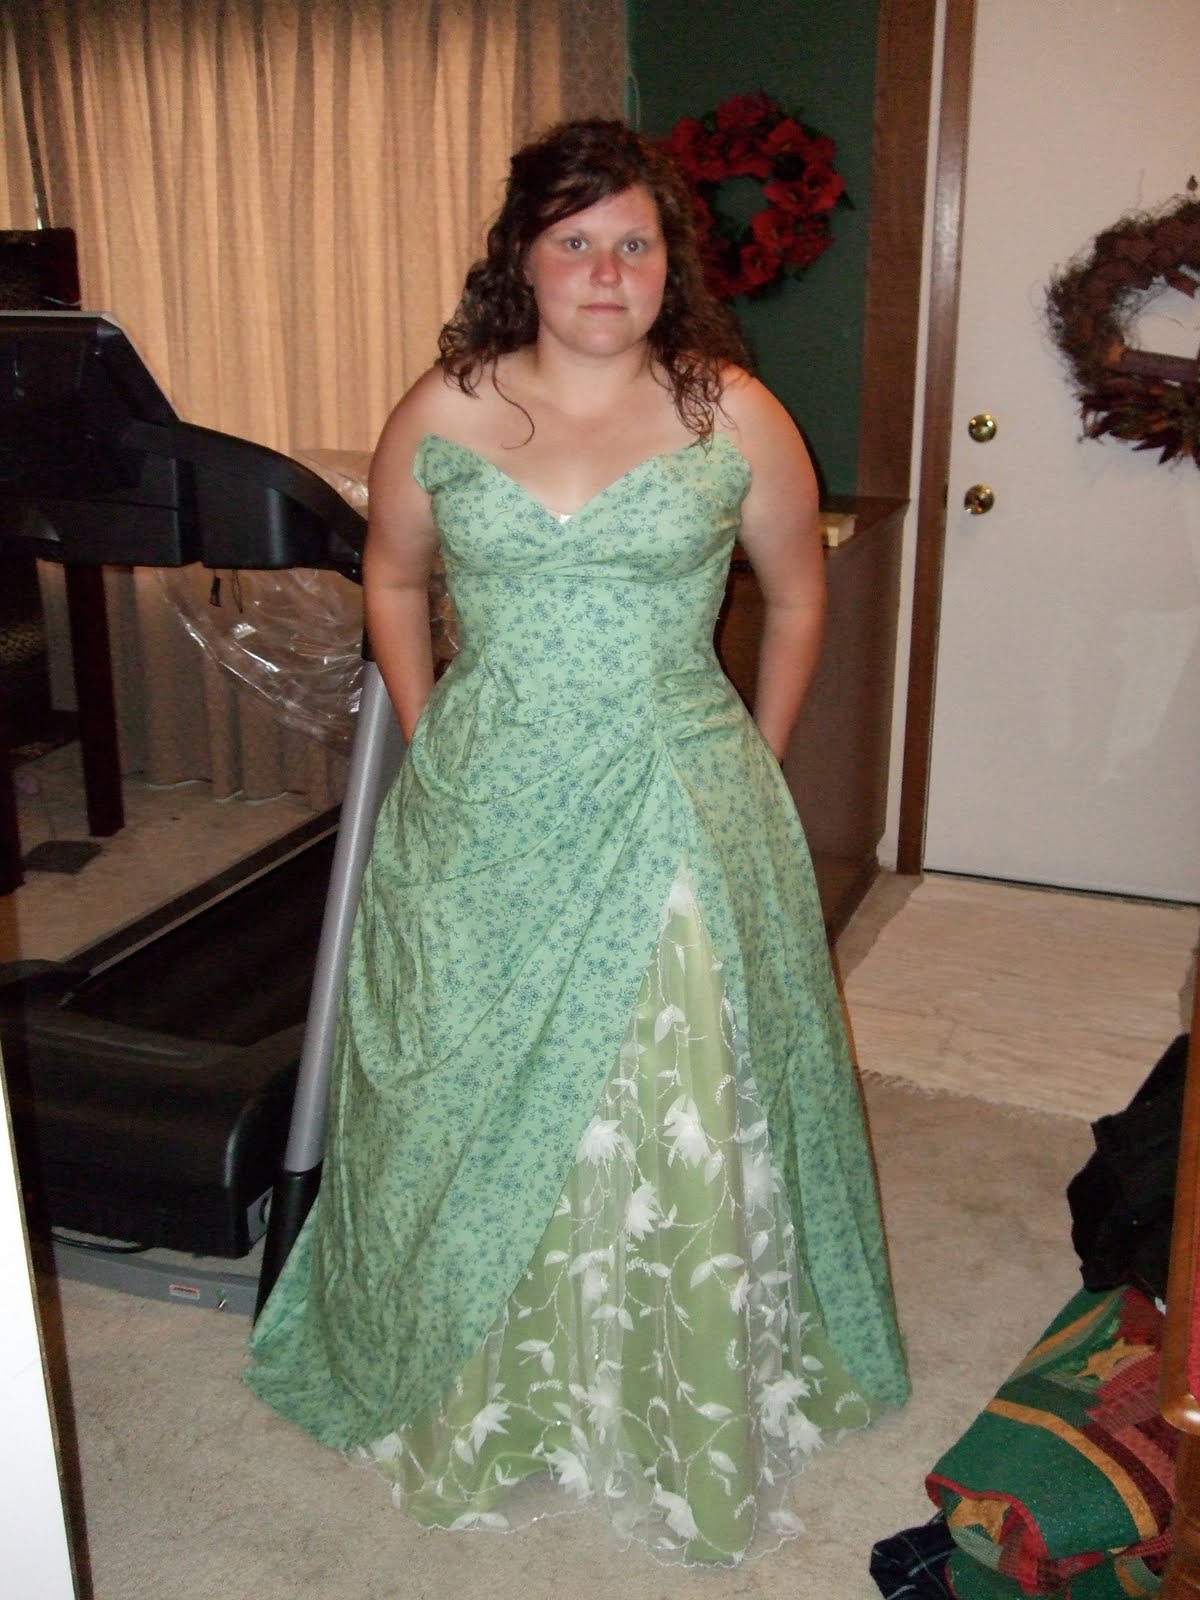 The Funky Seamstress: Lindsey’s Wedding Dress – Fitting – July 6, 2010